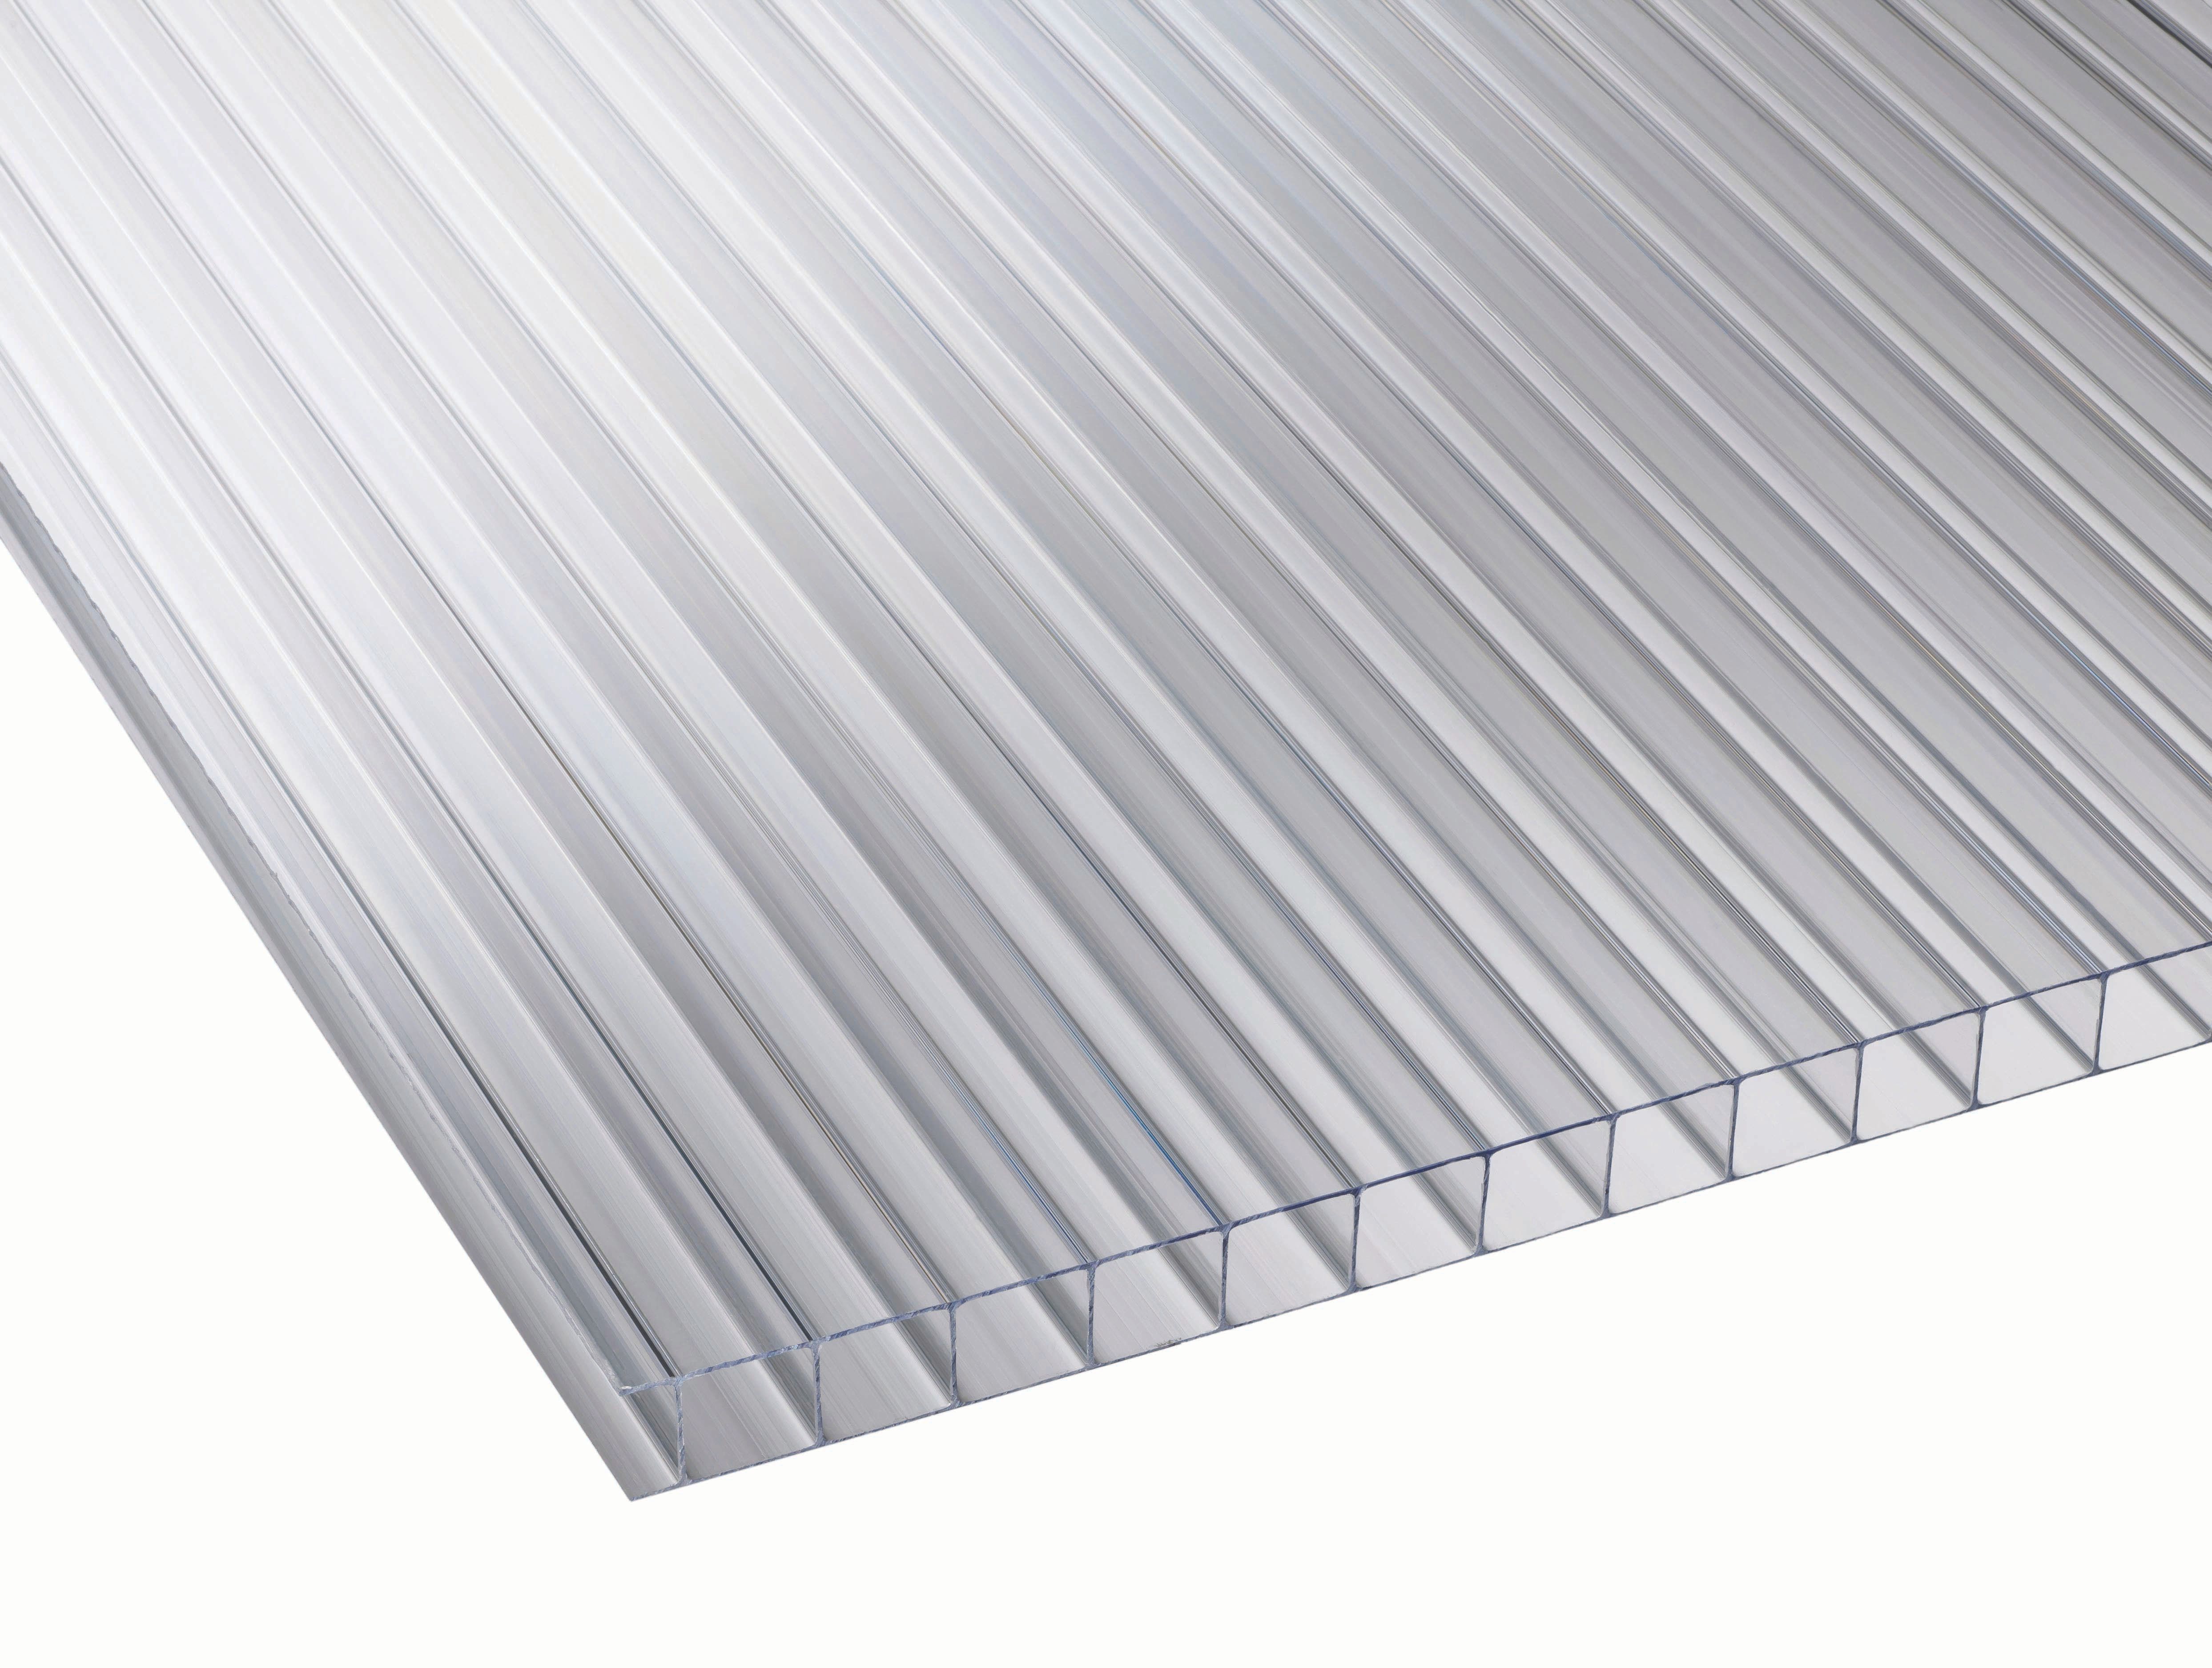 Image of 10mm Clear Multiwall Polycarbonate Sheet - 4000 x 700mm